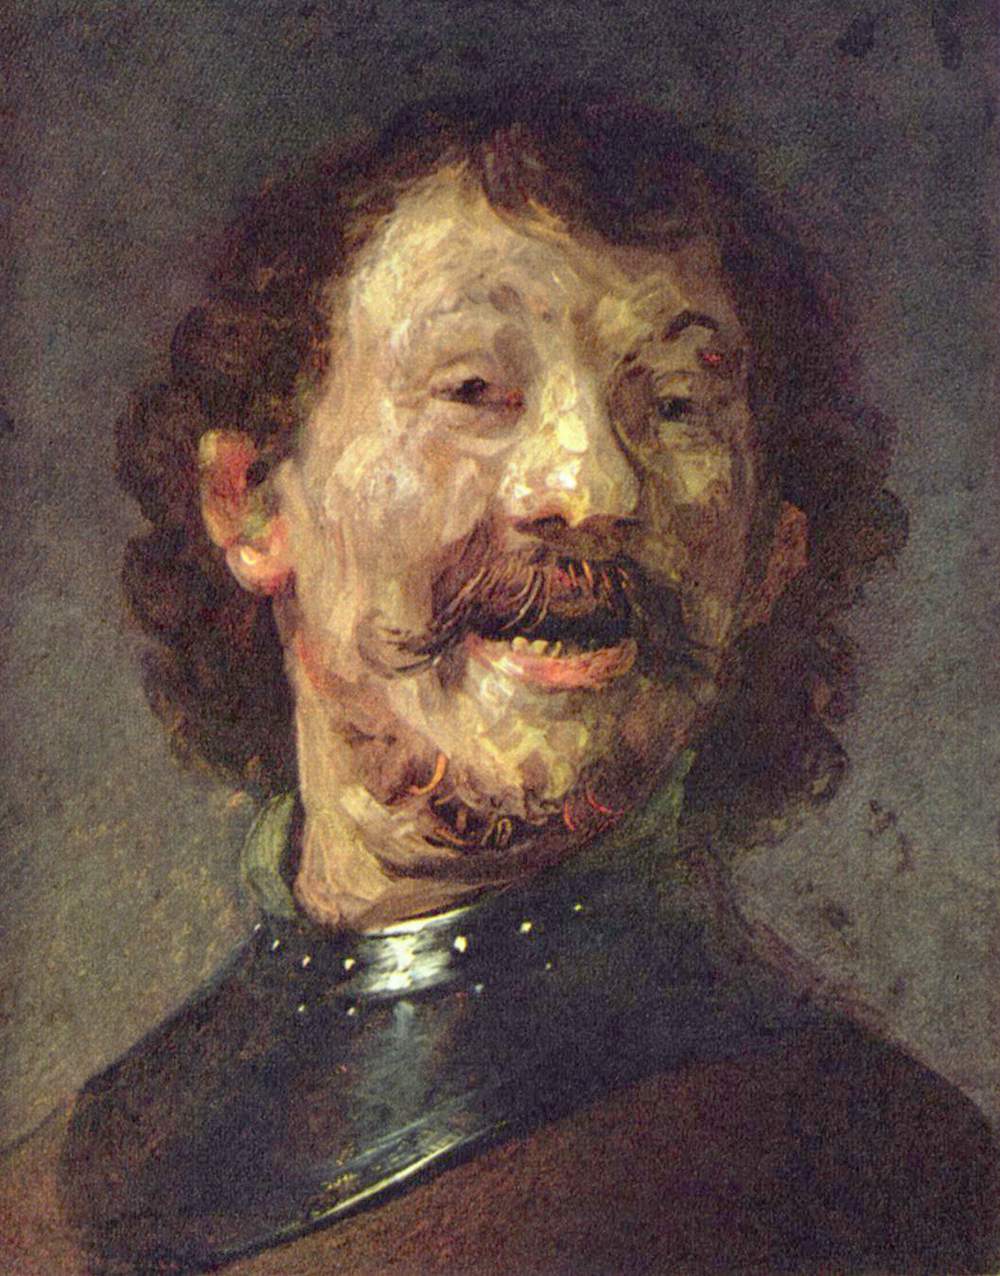 Laughing Soldier Painting by Rembrandt Reproduction for Sale